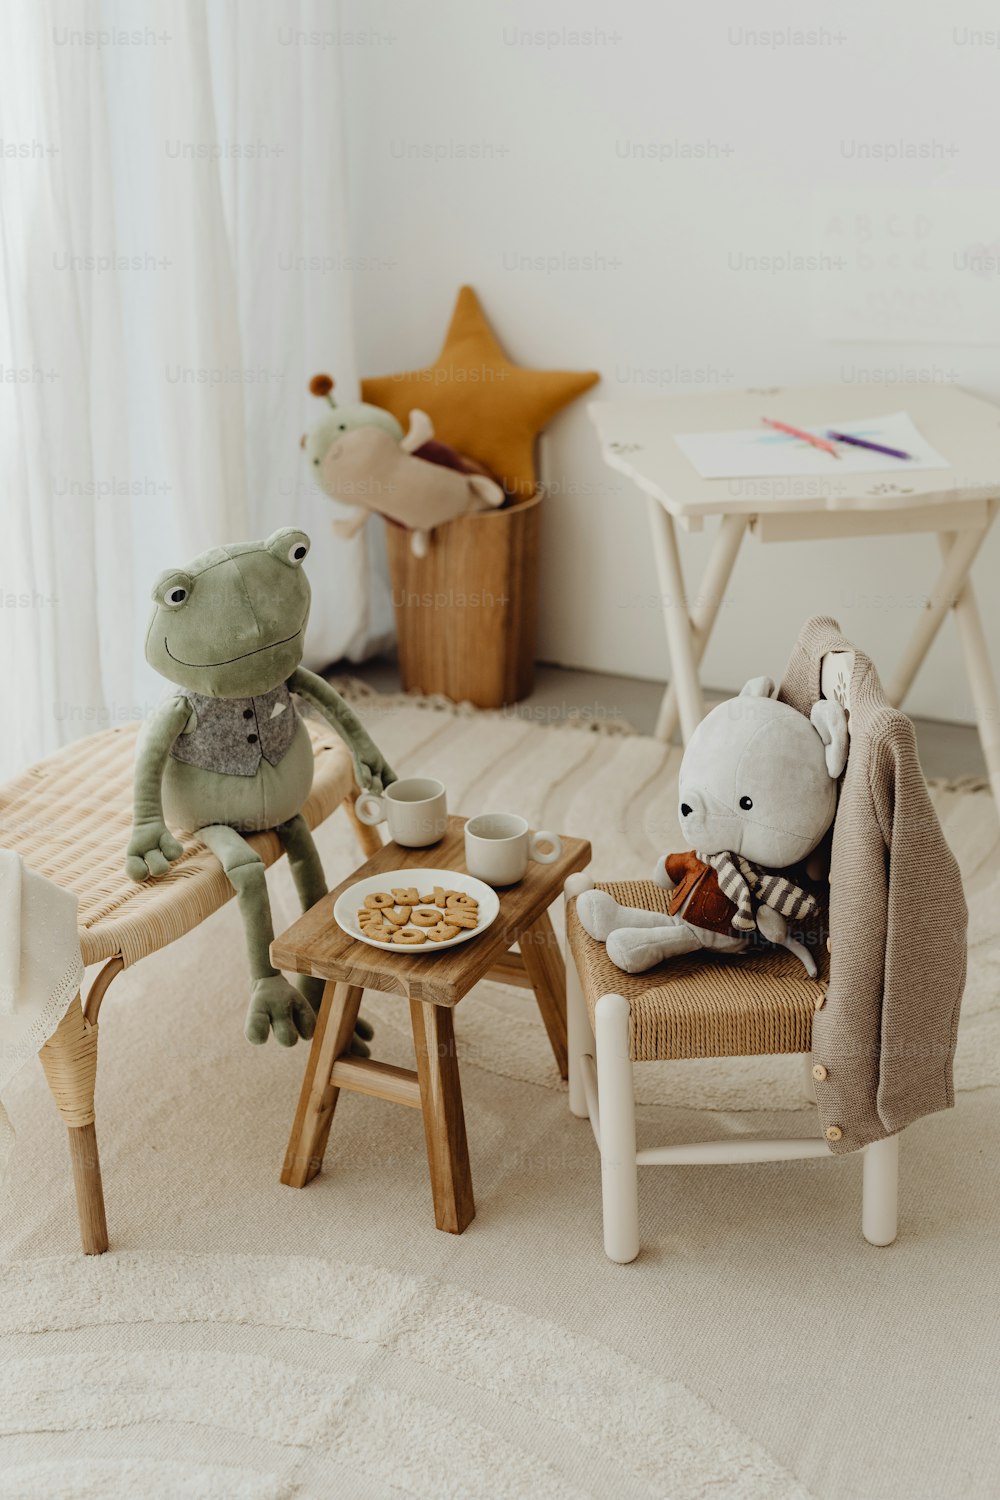 two stuffed animals sitting on chairs in a room